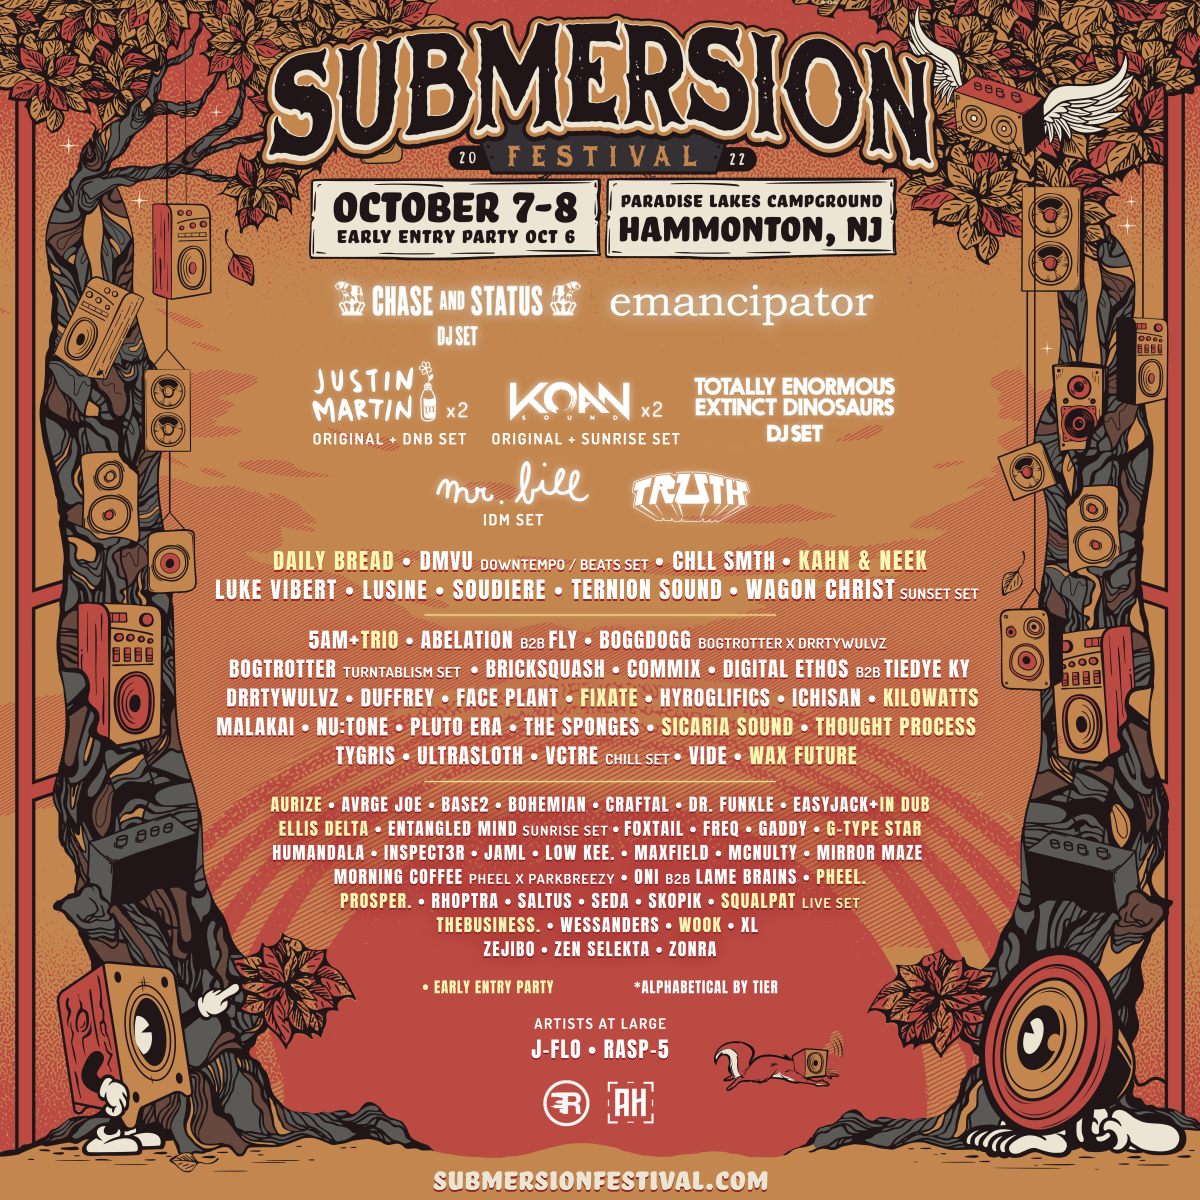 The 2022 Submersion Festival lineup features headlining sets from Chase & Status, Emancipator, KOAN Sound and more.